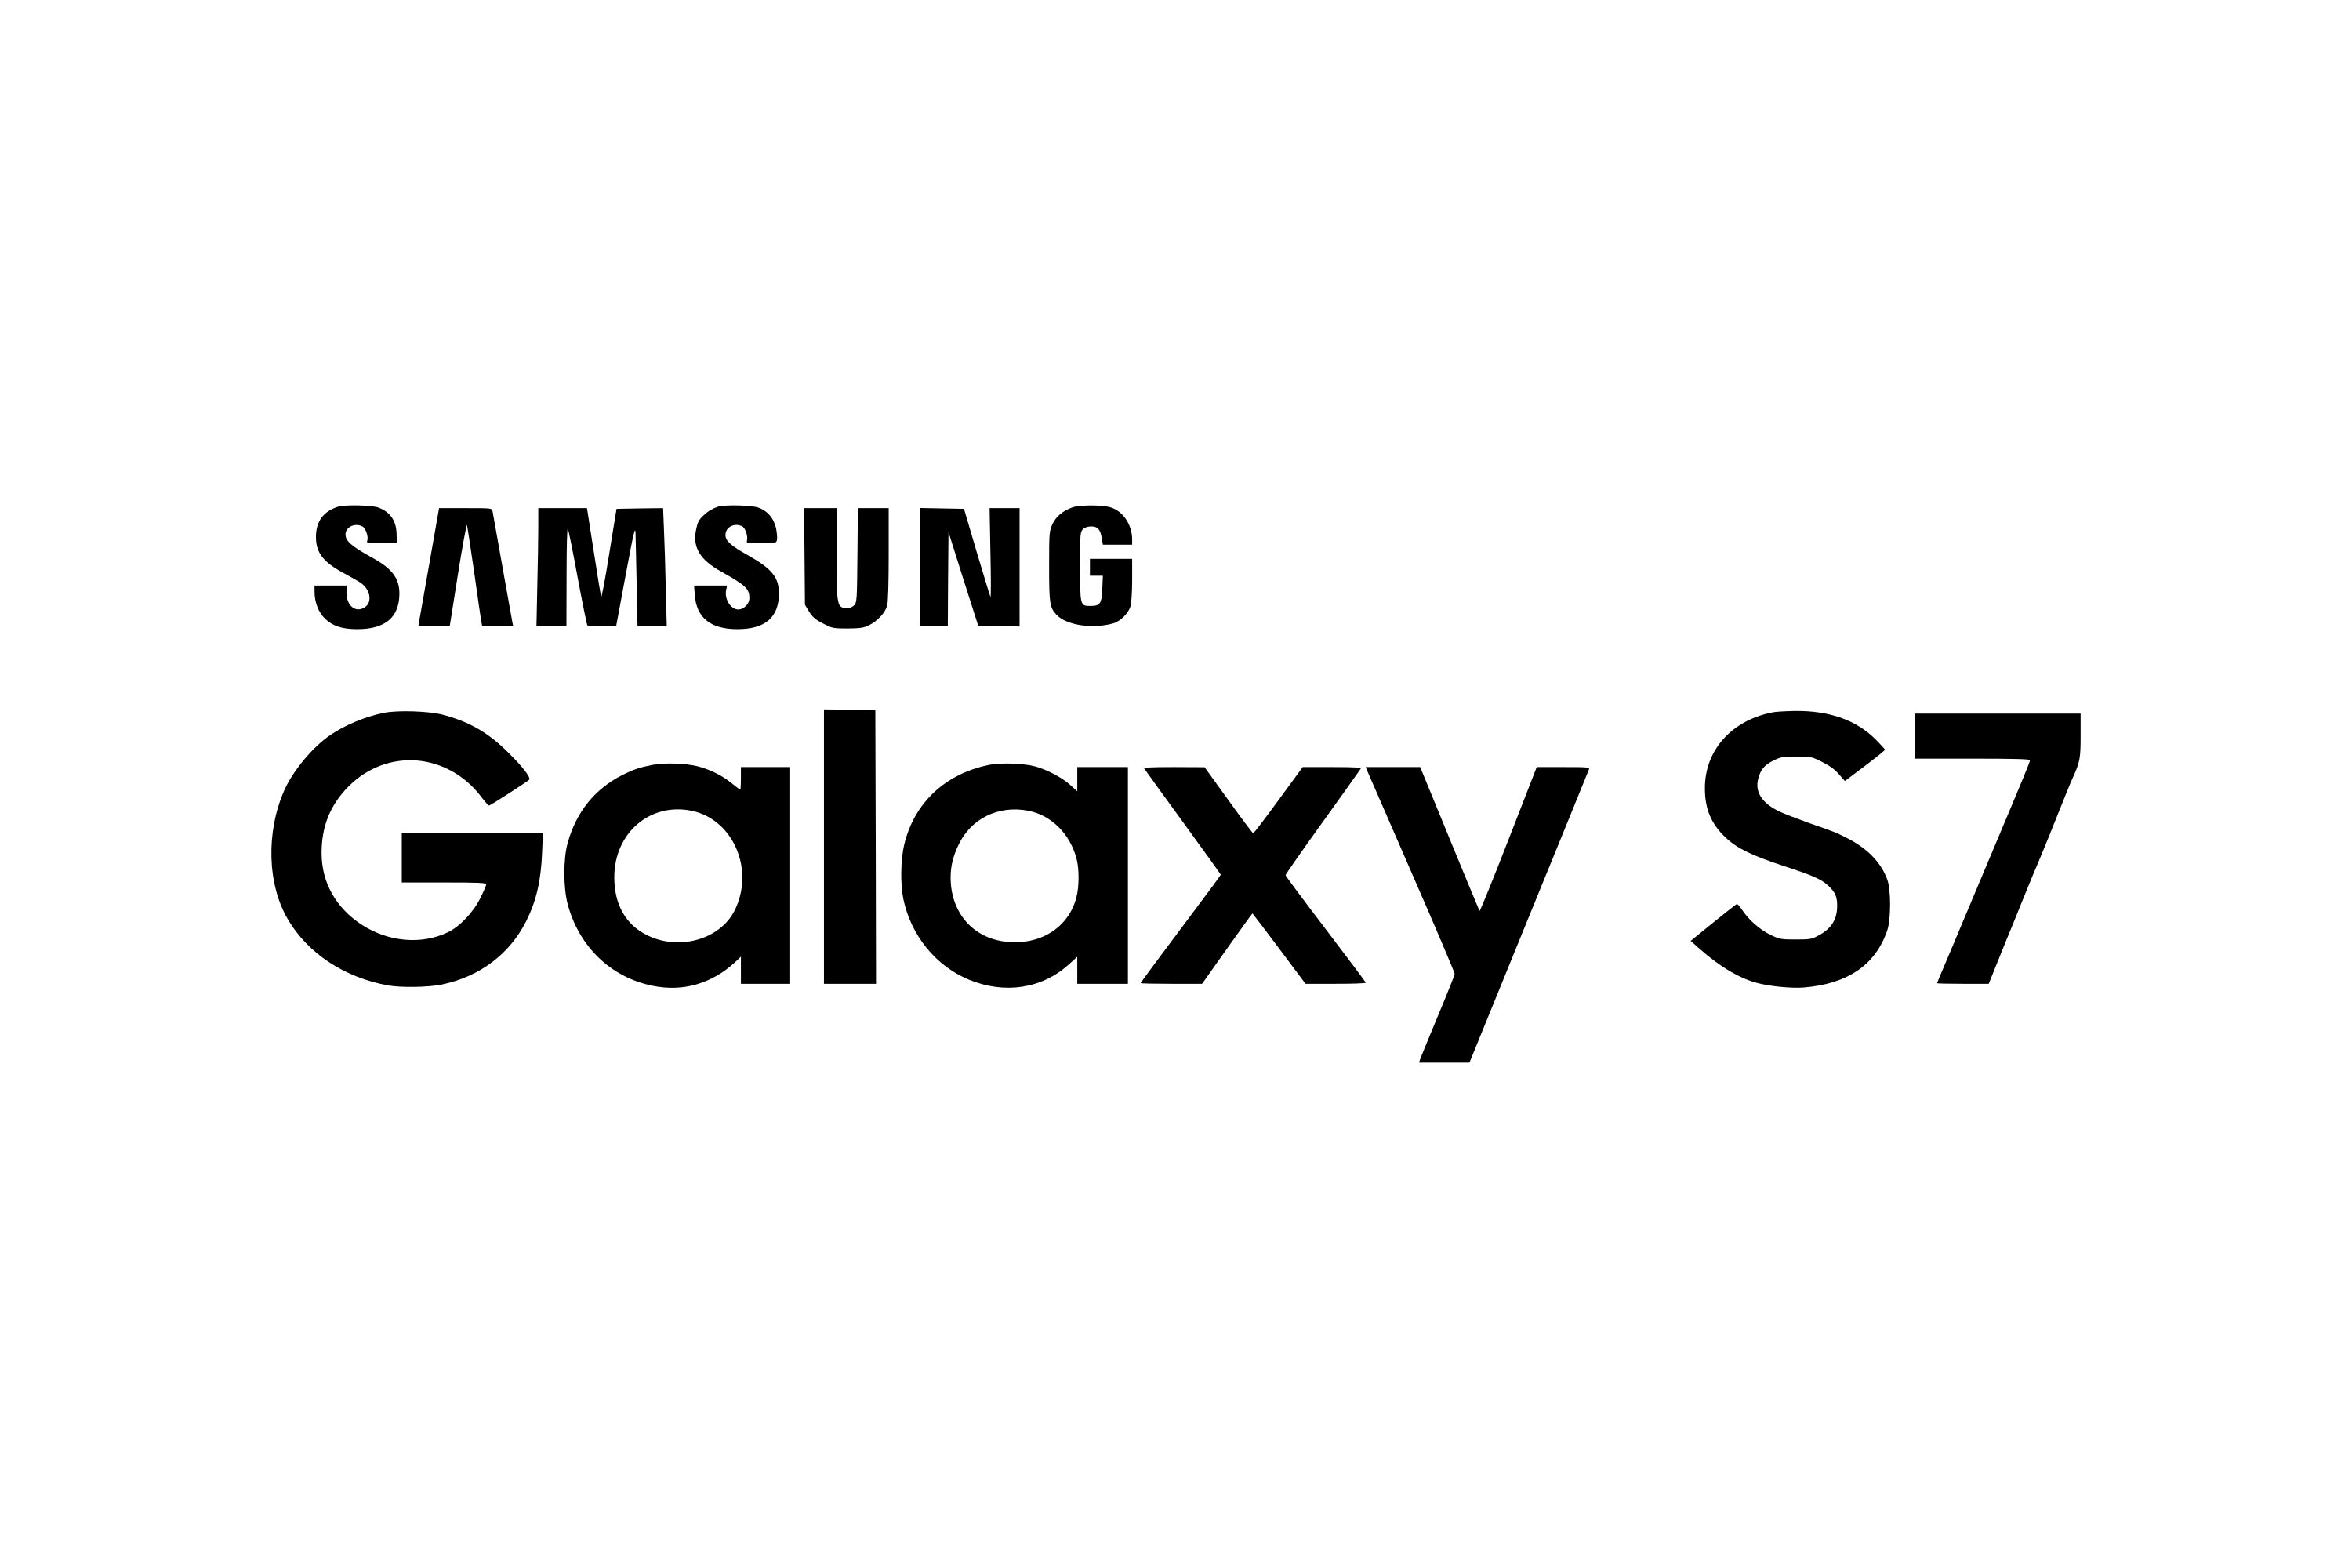 Download Samsung Galaxy S7 Logo in SVG Vector or PNG File Format - Logo